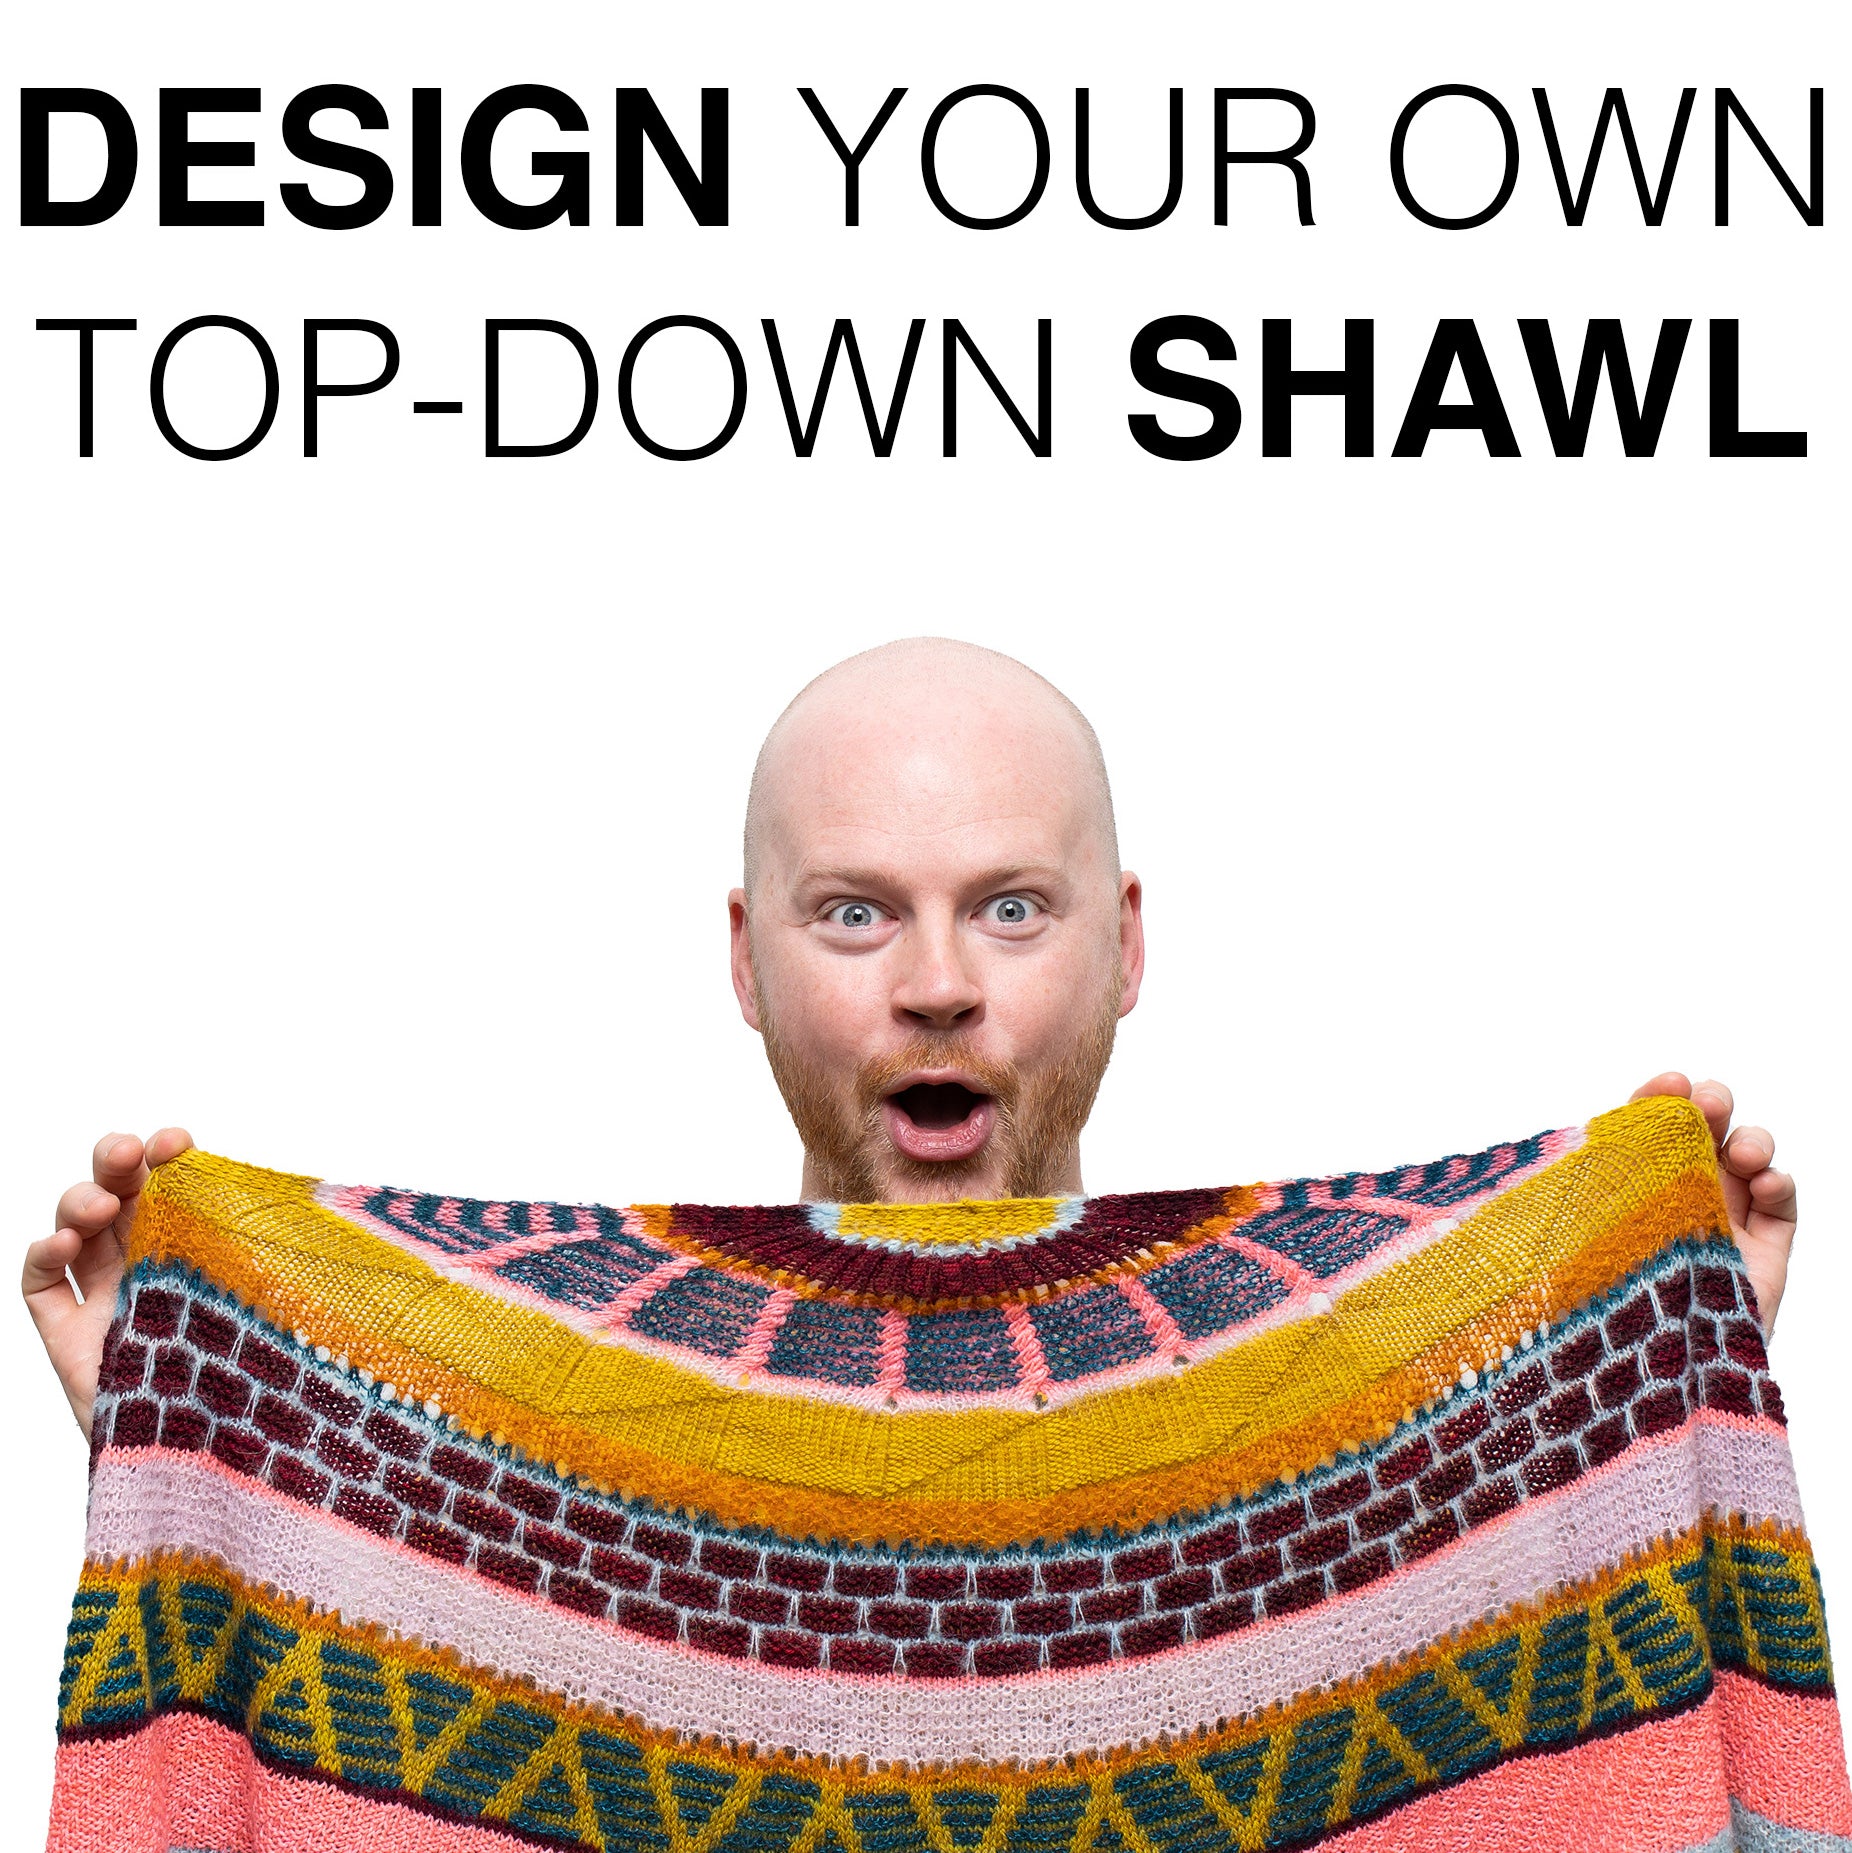 Design Your Own Top-Down Shawl